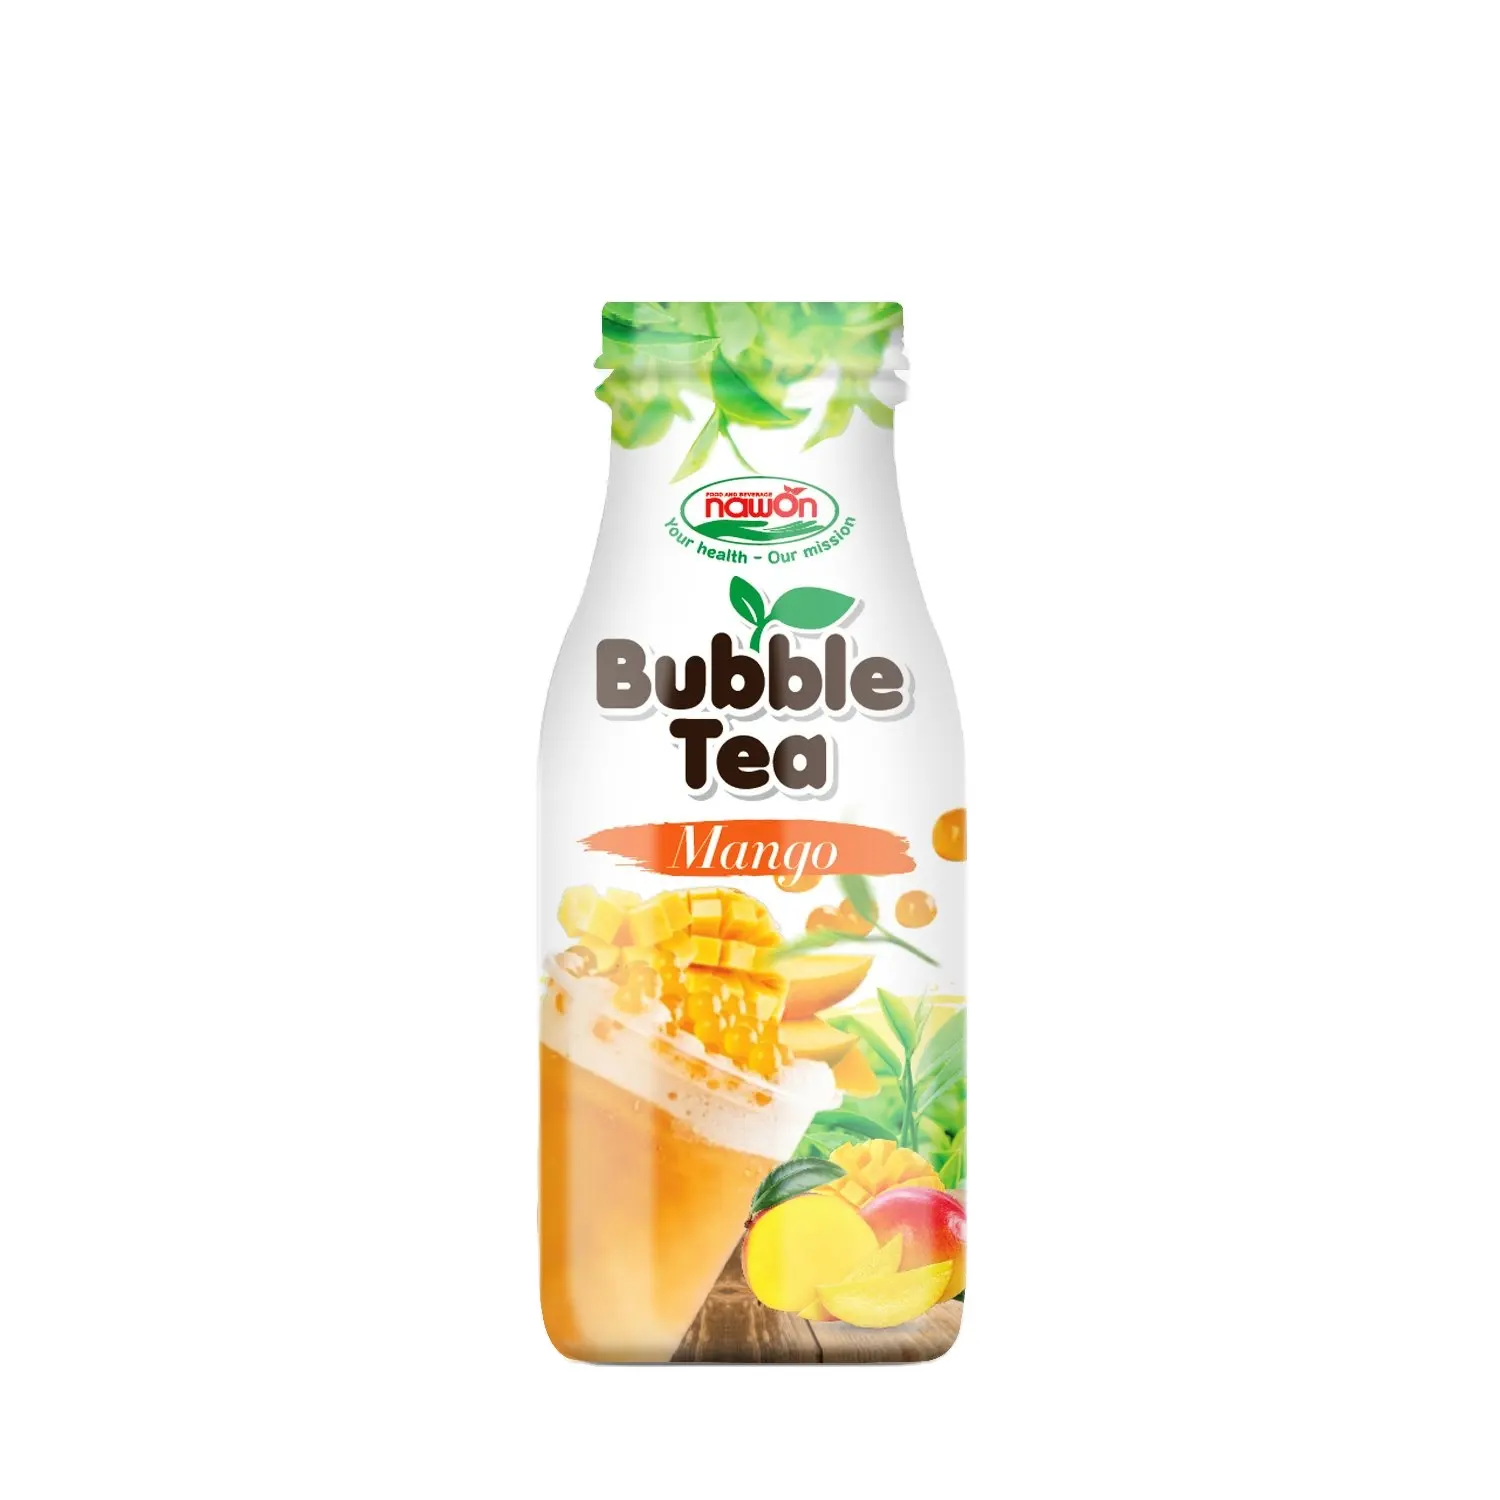 280ml Bubble Tea Mango Flavor Nawon Beverage Wholesale Supplier With Popping Boba Best Price Private Label Beverage Production